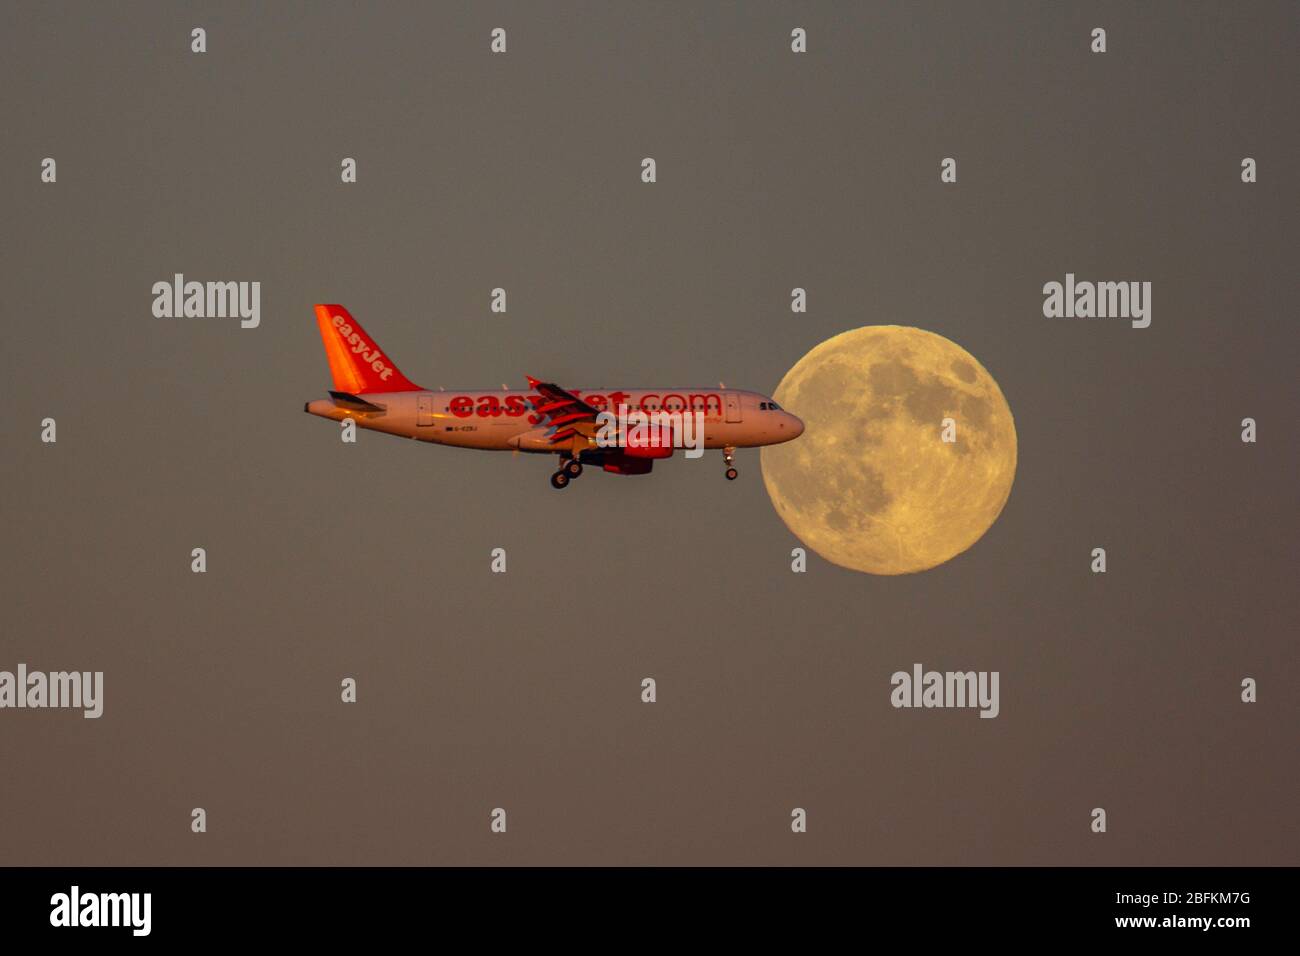 Airplane flying in front of the moon Stock Photo